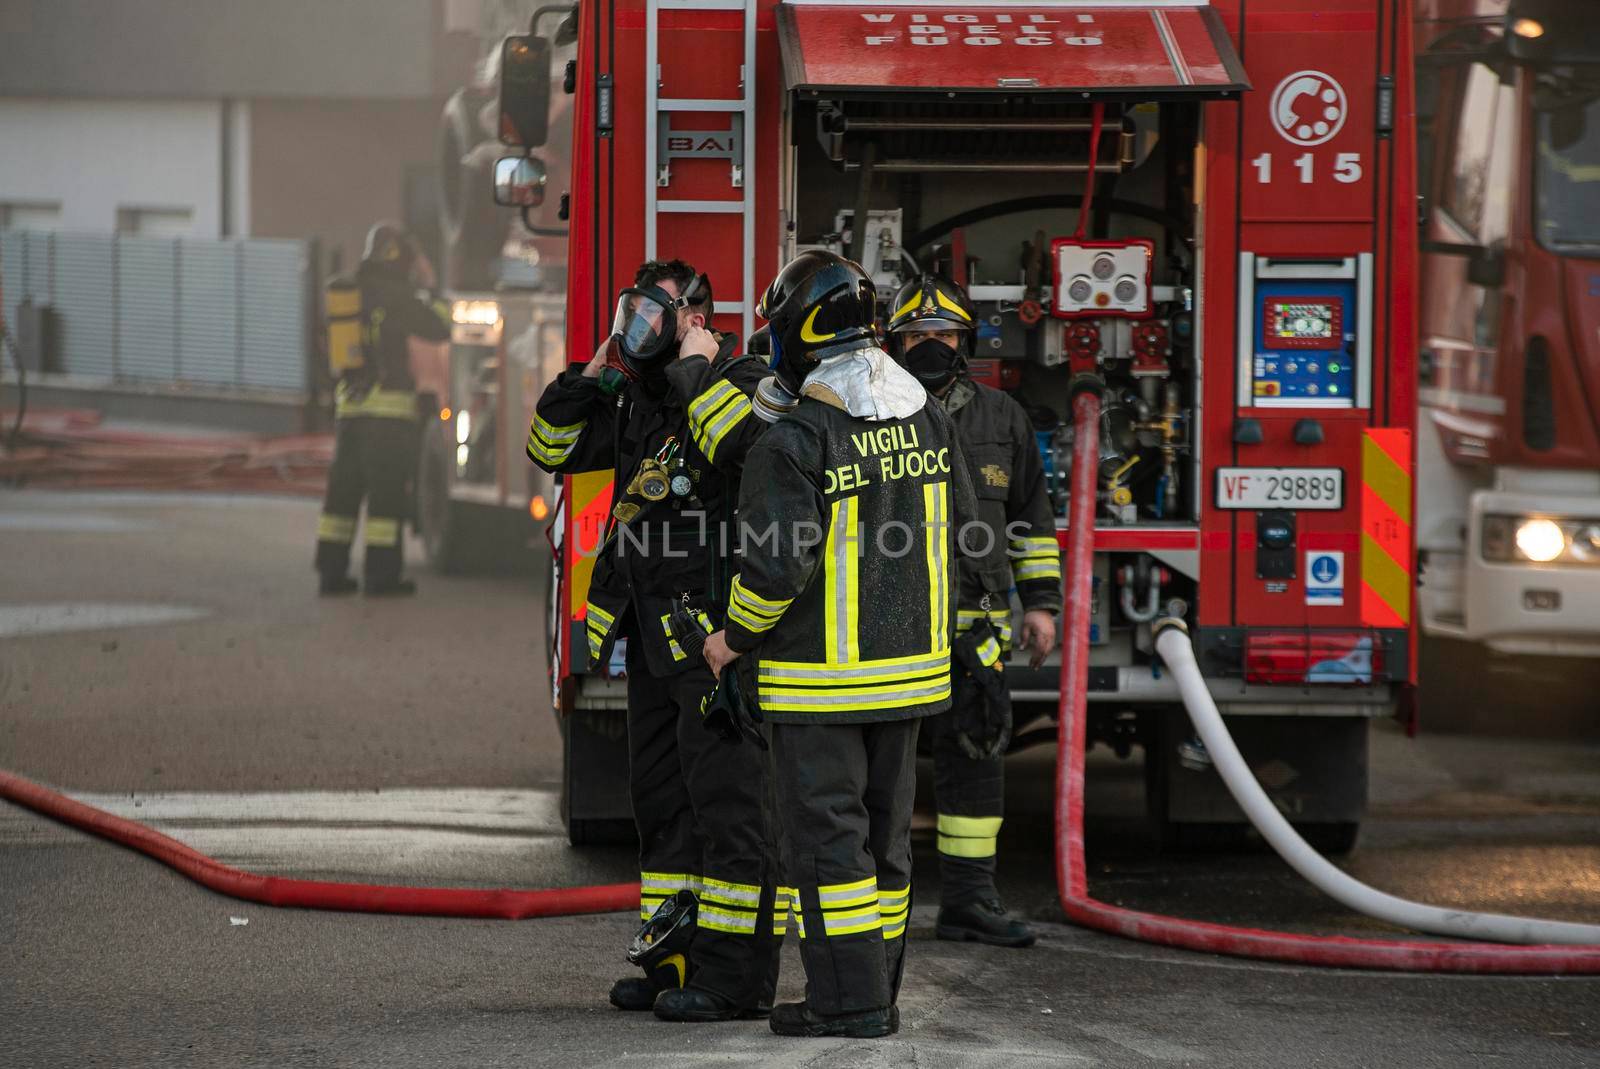 Firefighters detail at work 2 by pippocarlot